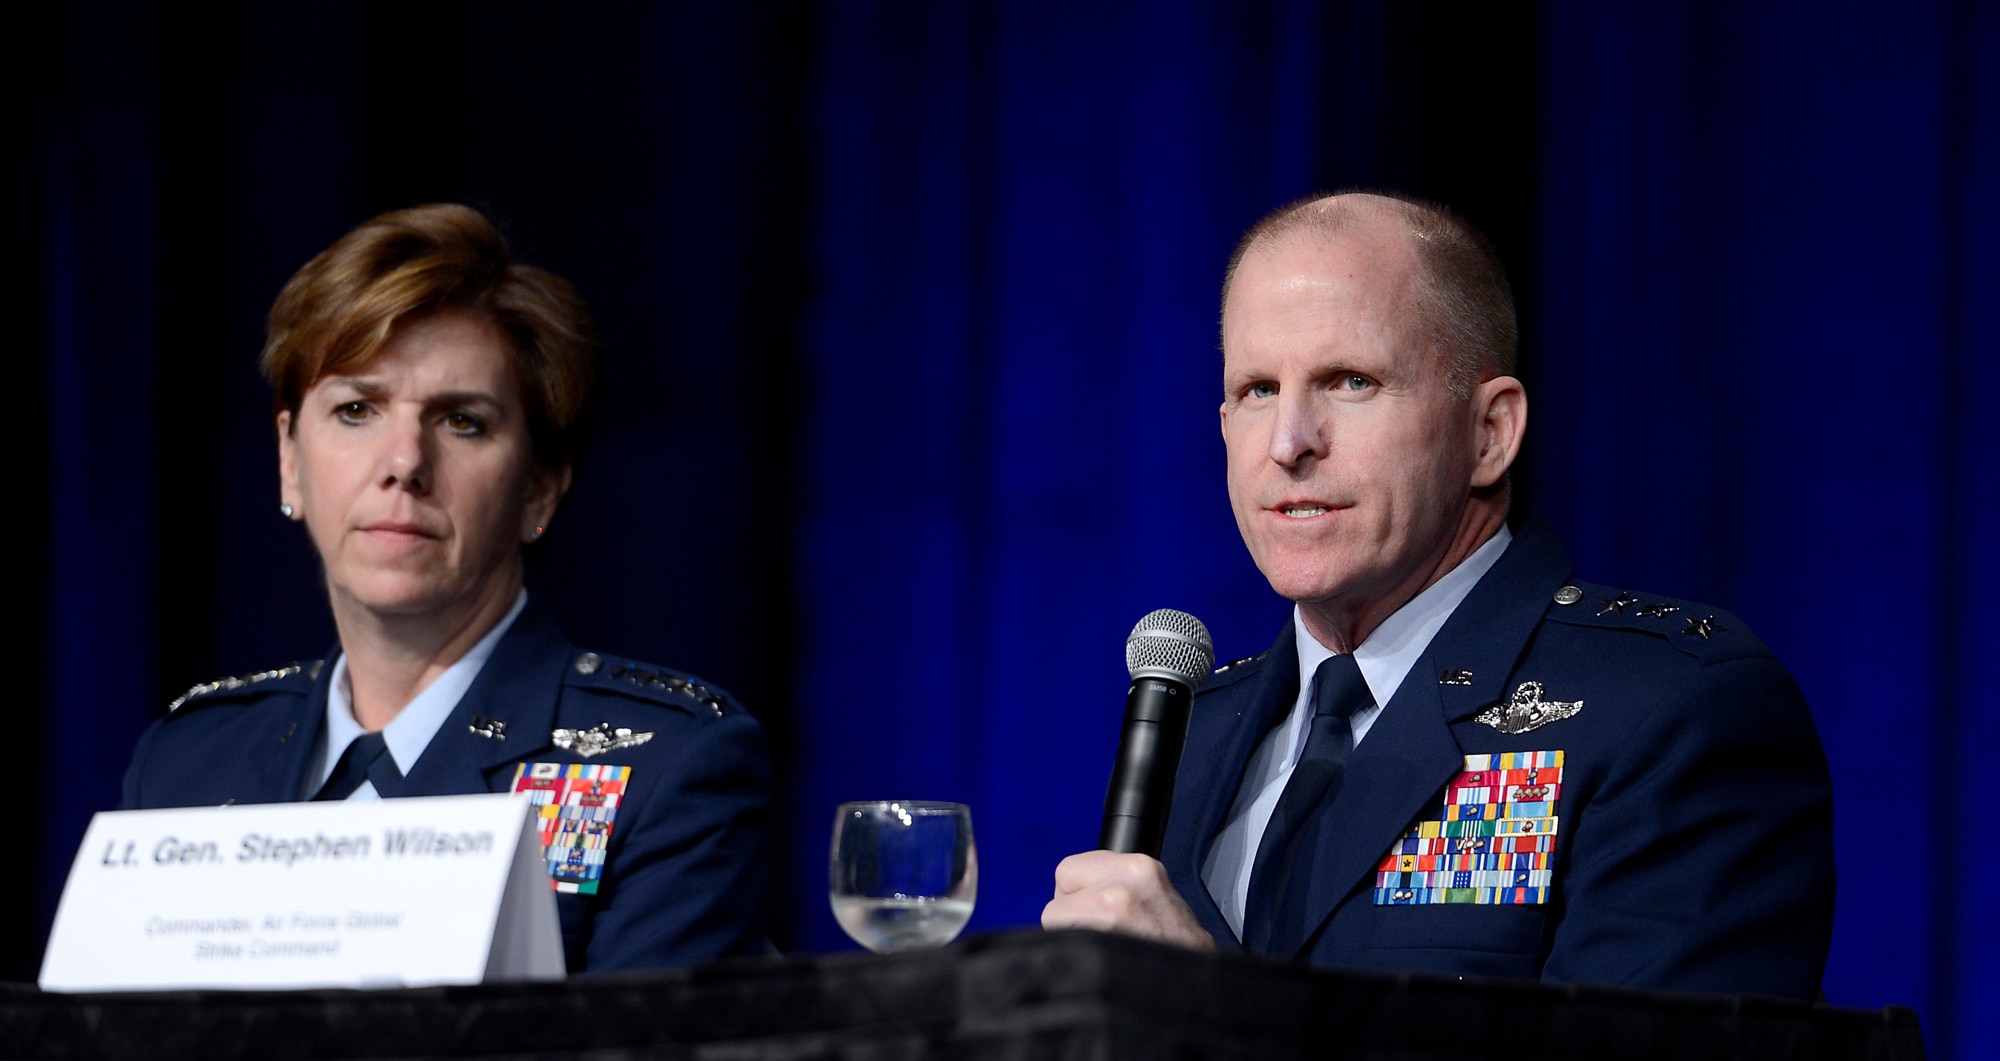 Lt. Gen. Stephen Wilson responds to a question from the audience during a panel discussion on Combat Air Forces at the Air Force Association's annual Air Warfare Symposium and Technology Exposition Feb. 12, 2015, in Orlando, Fla.  Wilson, the Global Strike Command commander, shared the panel with Air Combat Command commander Gen. Hawk Carlisle, U.S. Air Forces in Europe commander Gen. Frank Gorenc, and Pacific Air Forces Command commander Gen. Lori J. Robinson. (U.S. Air Force photo/Scott M. Ash)